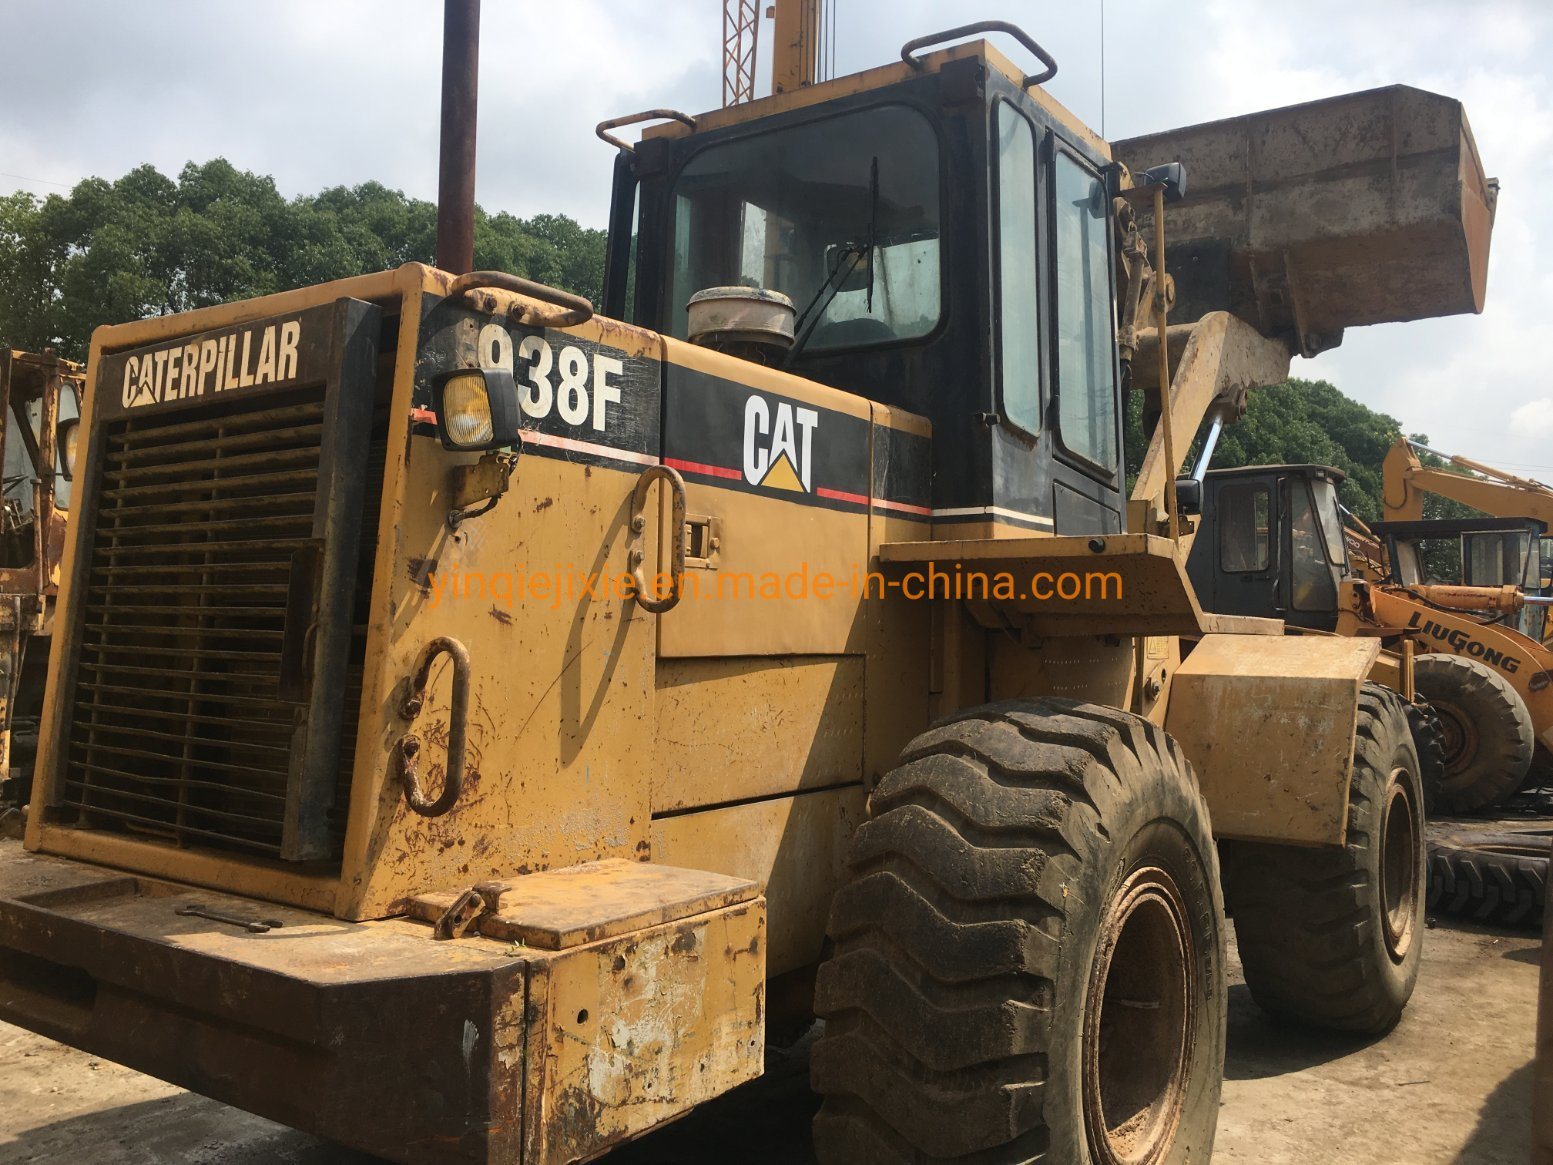 Used Wheel Loader Caterpillar 938f Used Cat 938f Wheel Loader for Sale